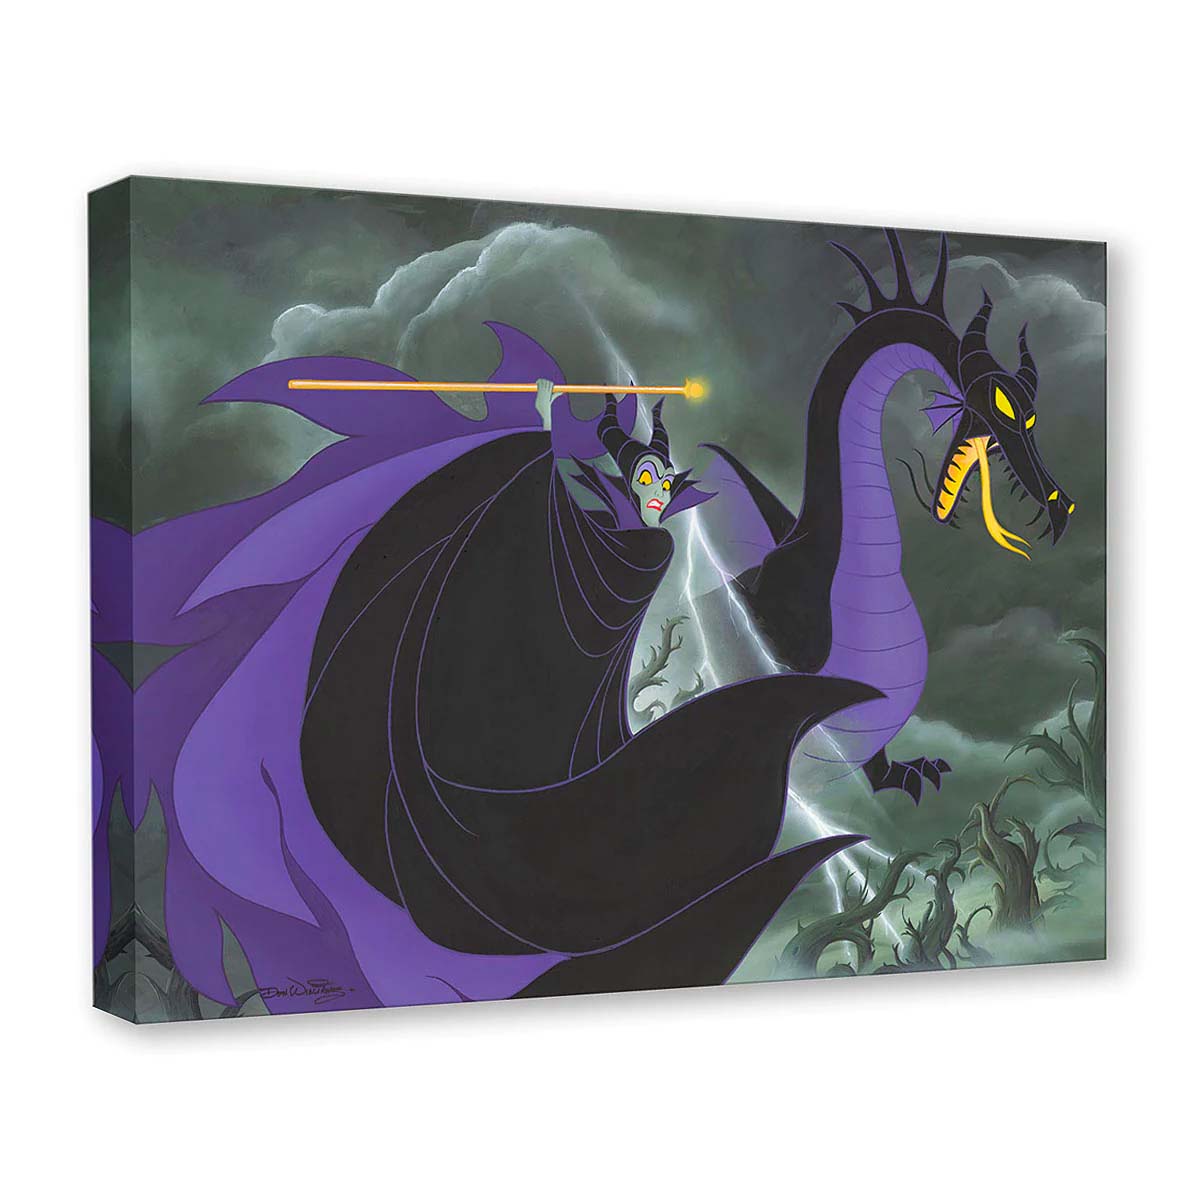 Don "Ducky" Williams Disney "Mistress of Evil" Limited Edition Canvas Giclee